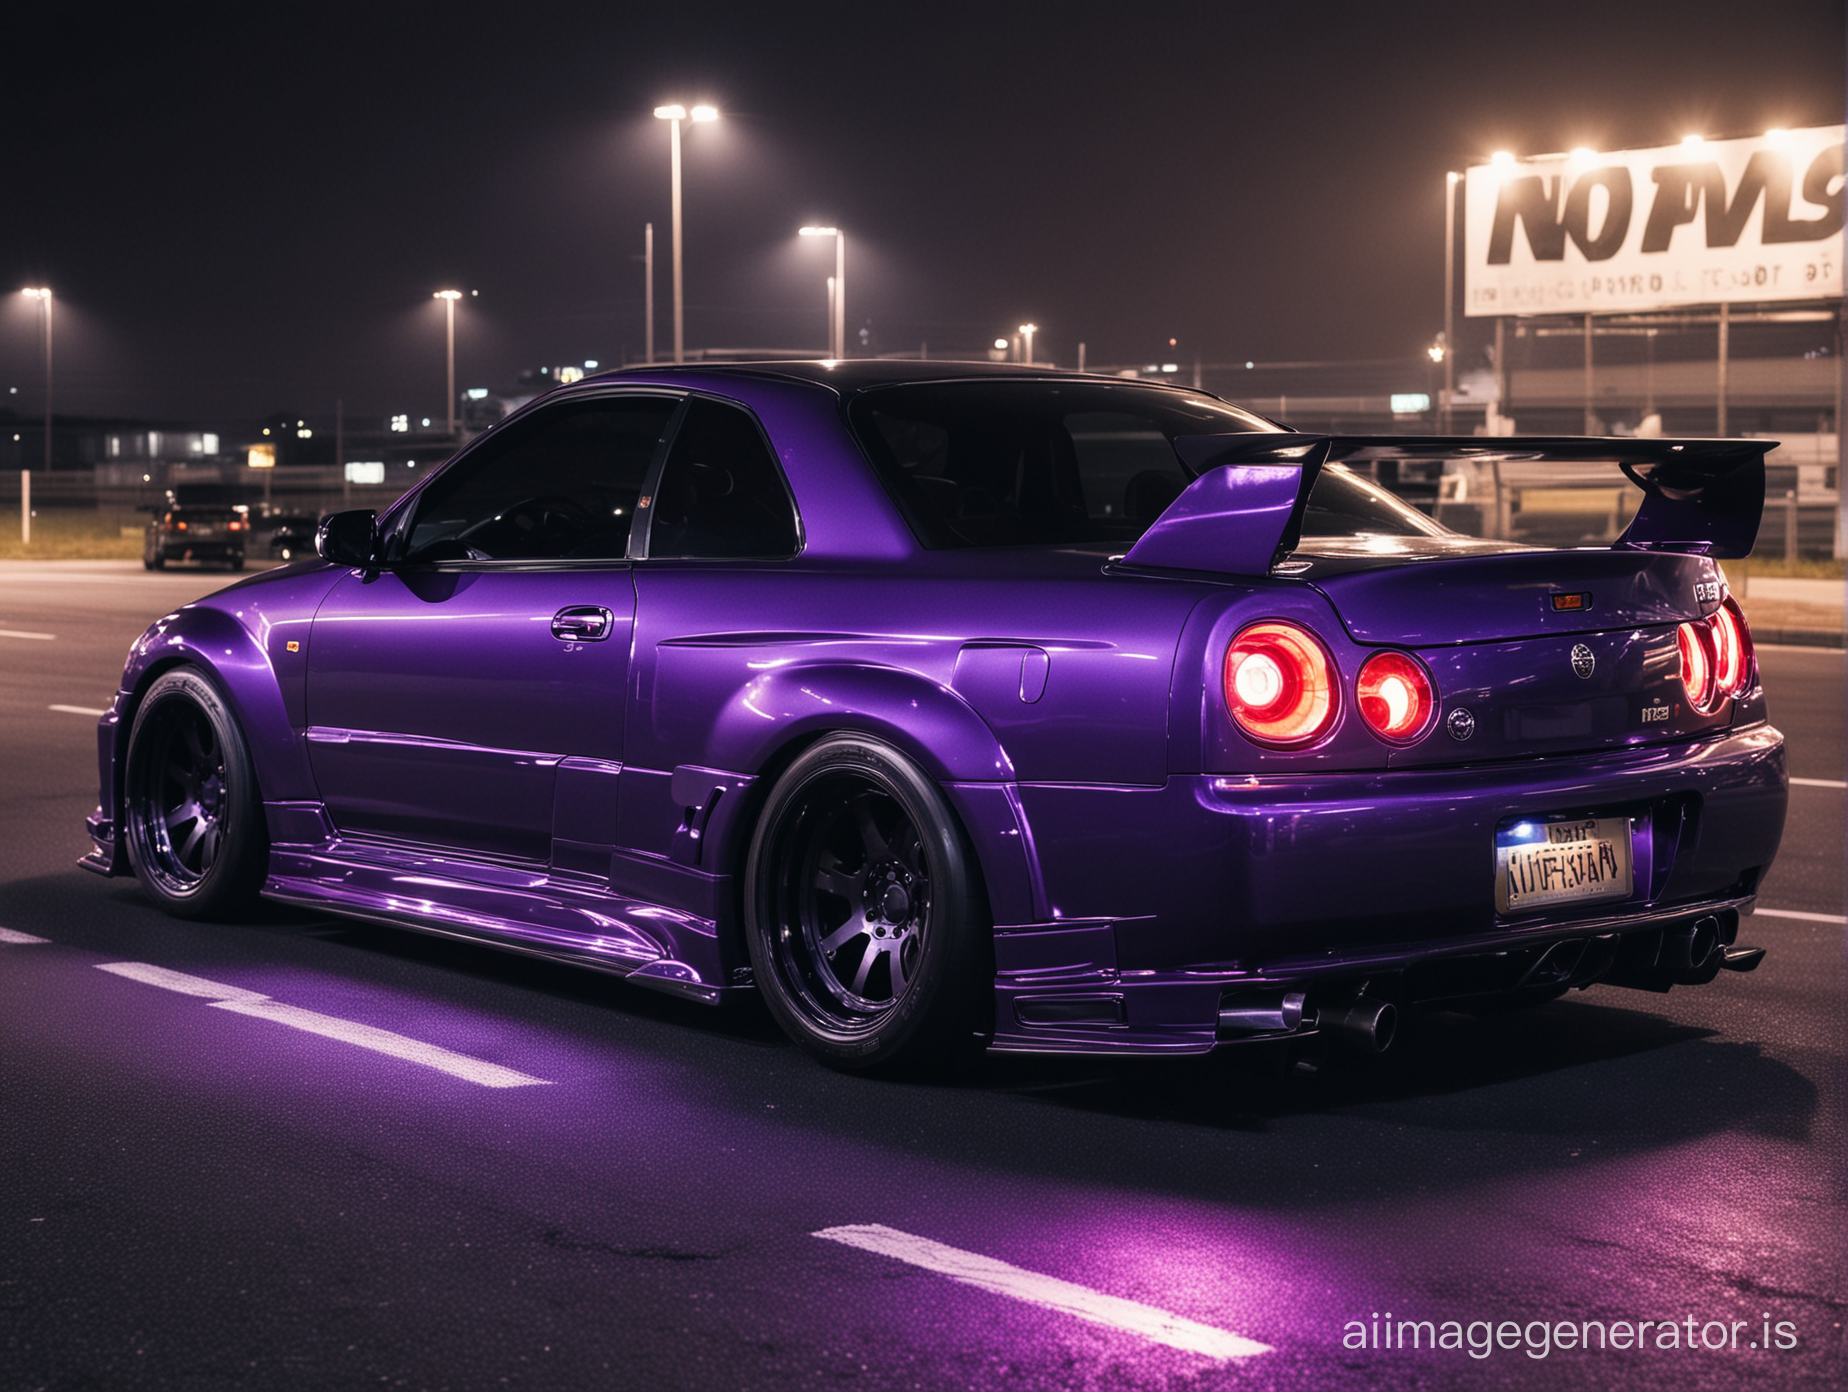 Nissan GTR r34 tuning like a monster on the Saturn ring driving at night drifting bigger spoiler nitro like lights coming out on the rear  purple light darkness 